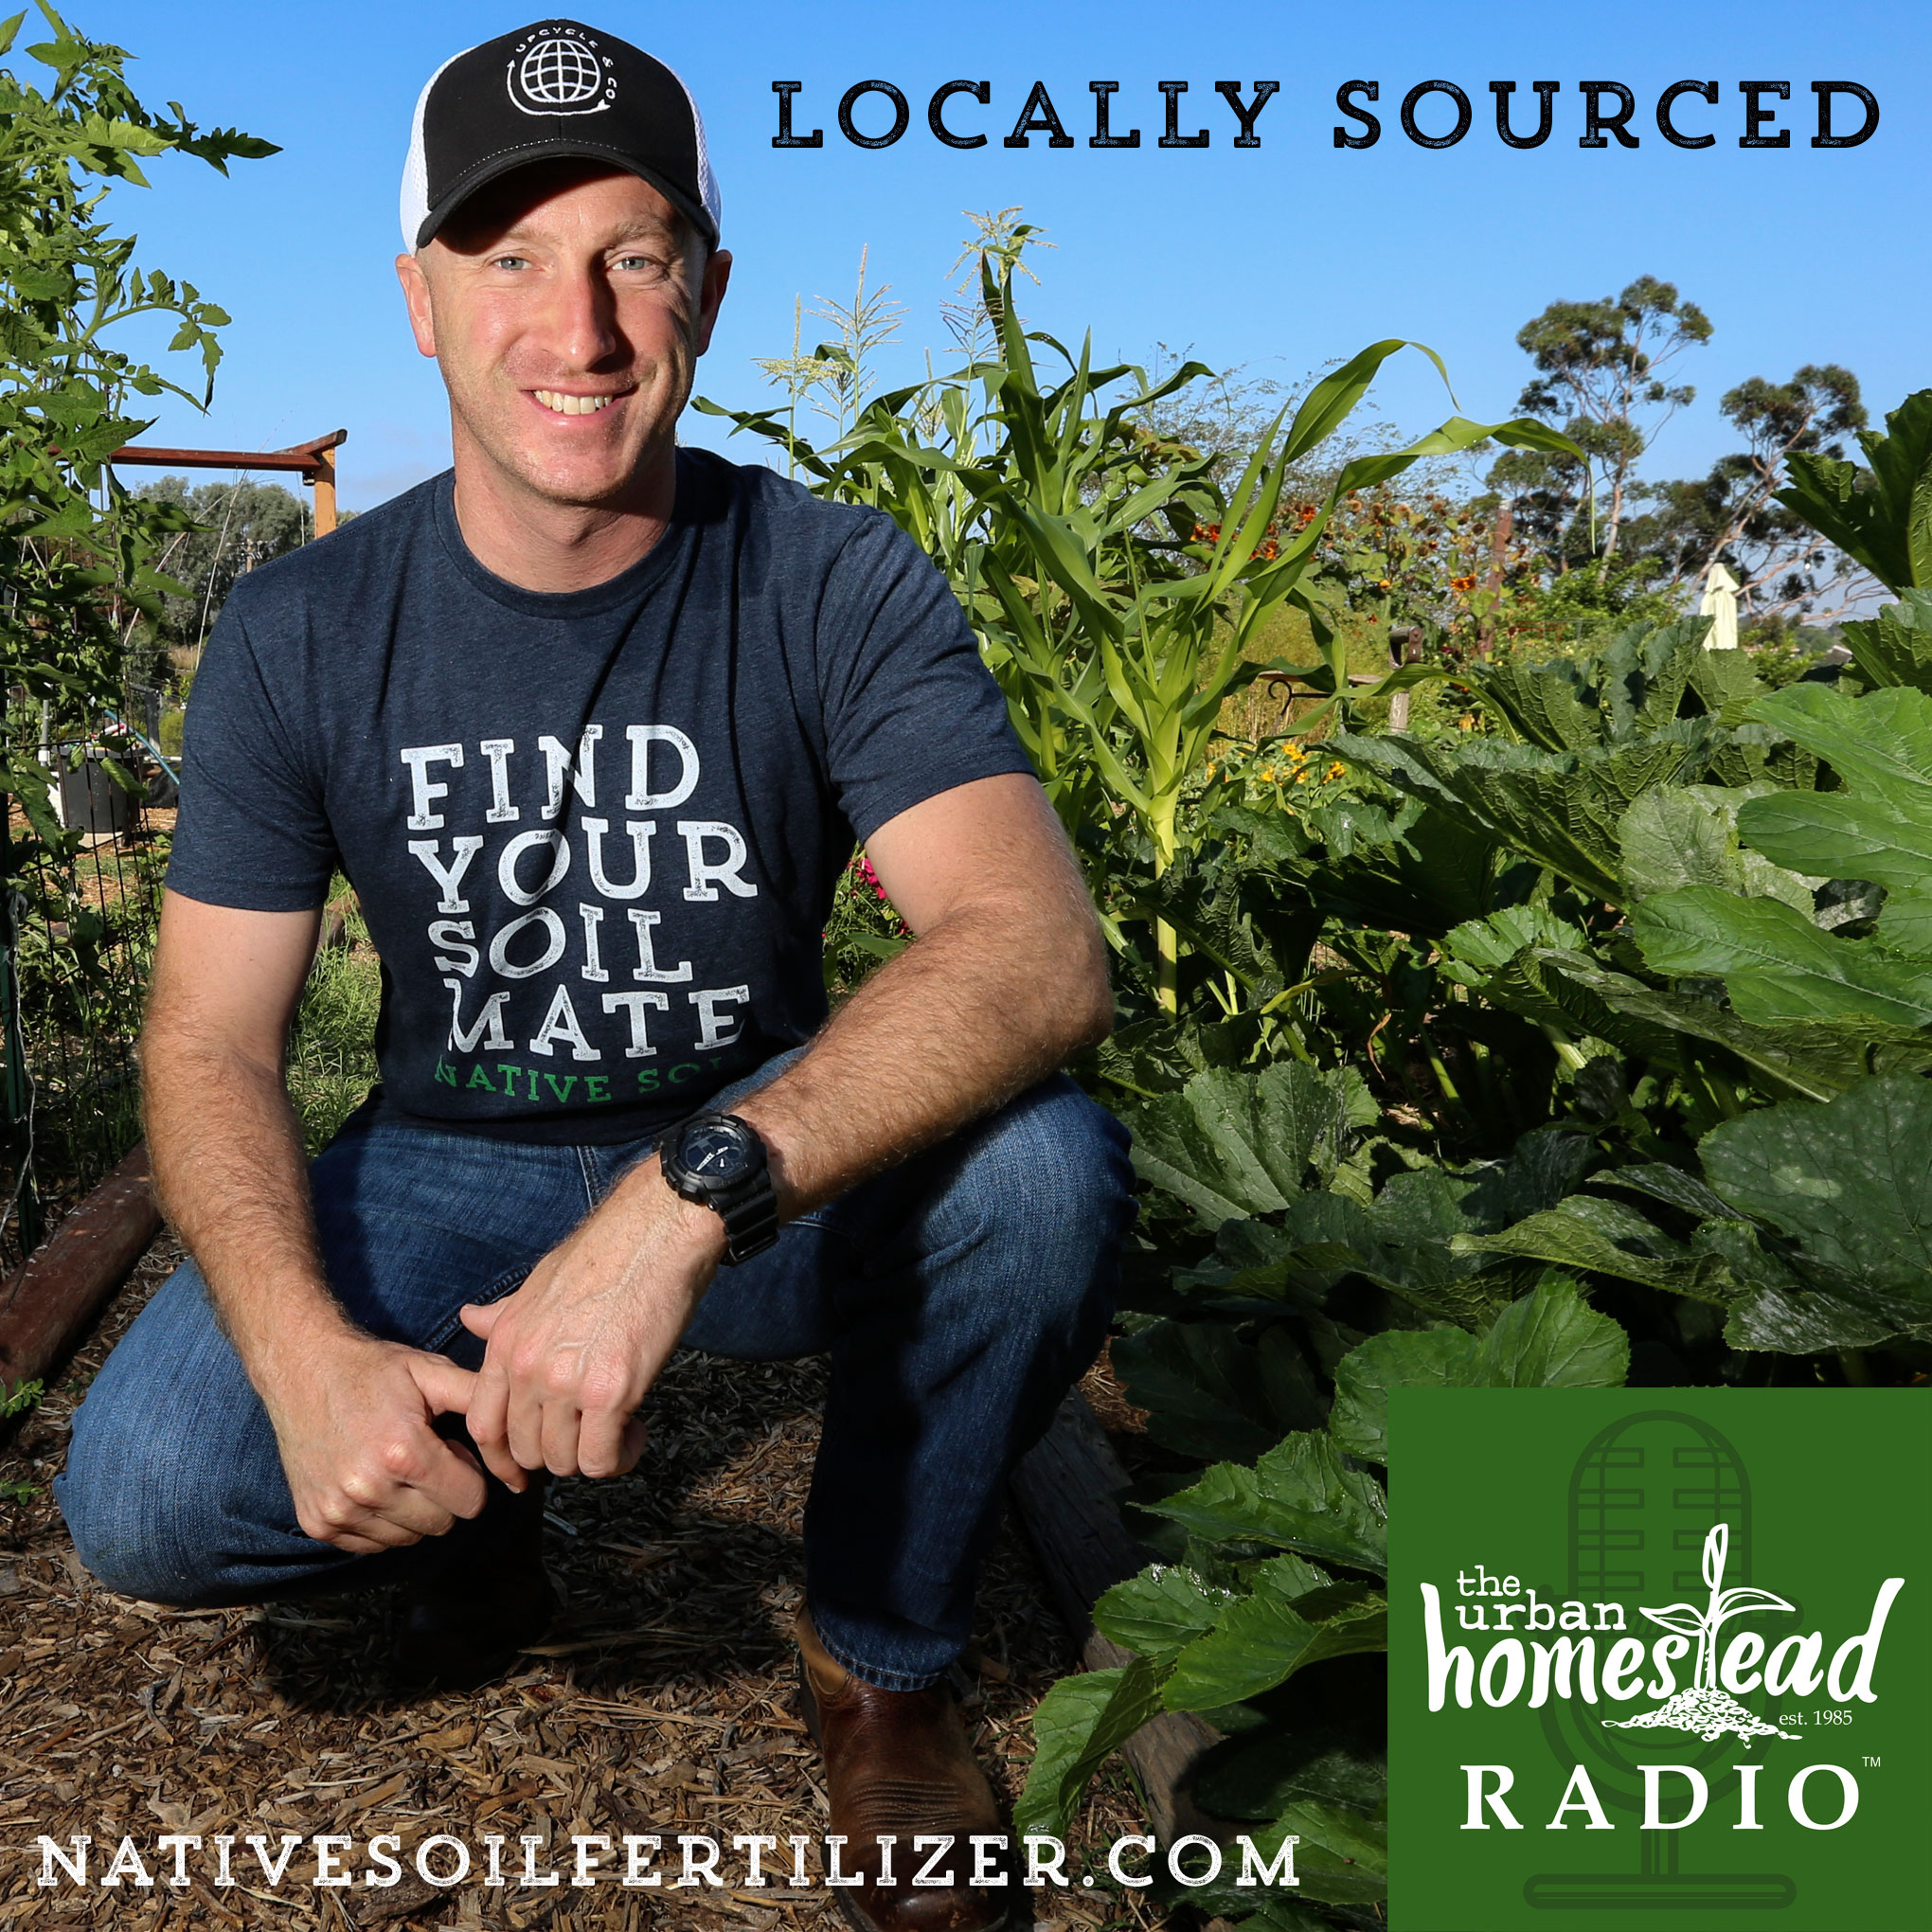 Urban Homestead Radio Episode 49: Jared Criscuolo of Upcycle Interview